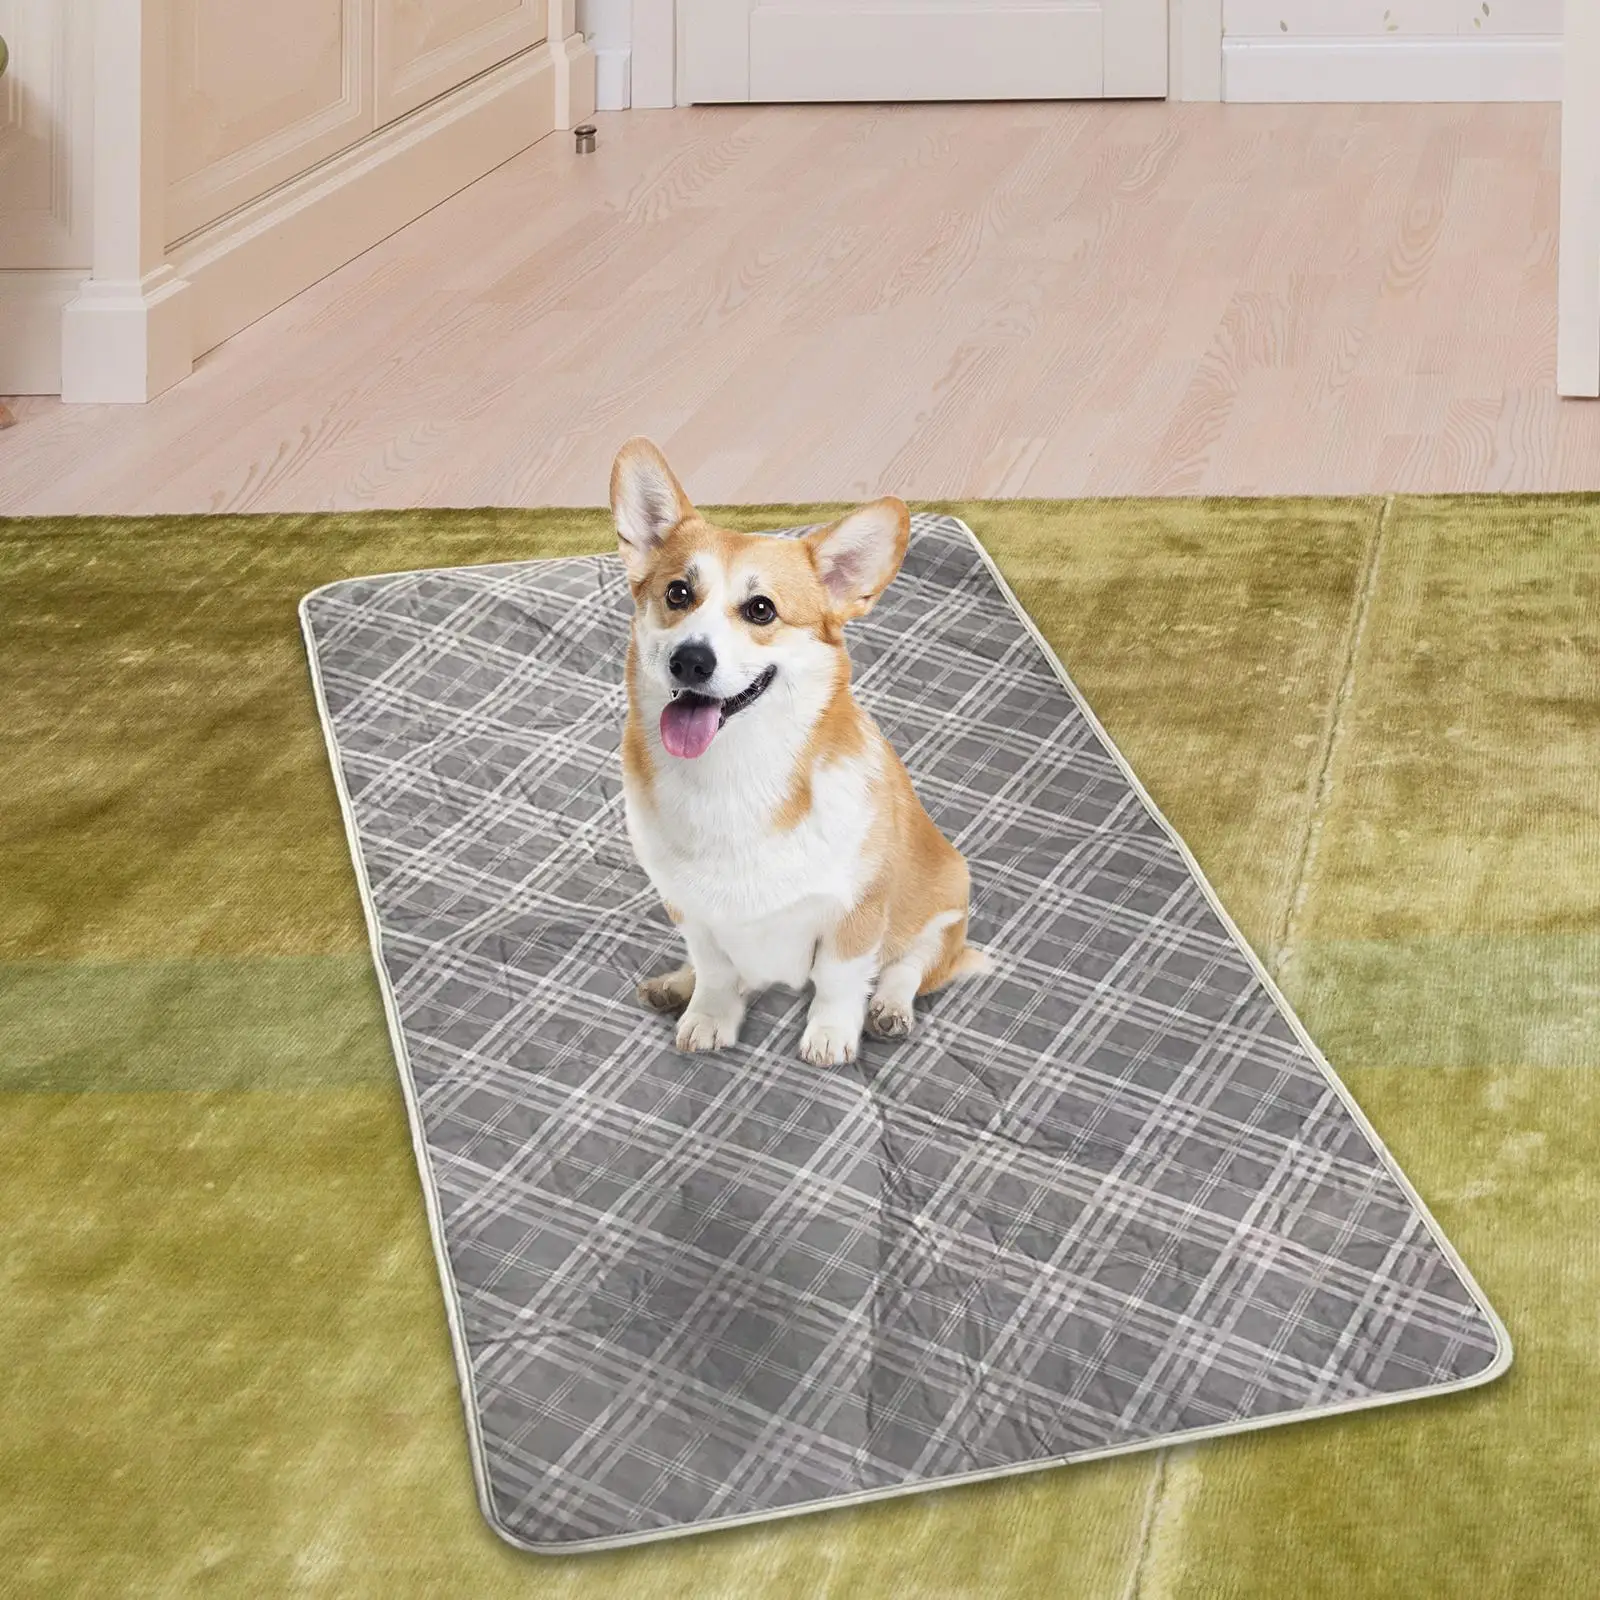 Pet Dog Pee Pad Cat Mat Puppy Kitten Washable Reusable Cushion Blanket for Playpen Outdoor Kennel Cage Supplies Sleeping Pad